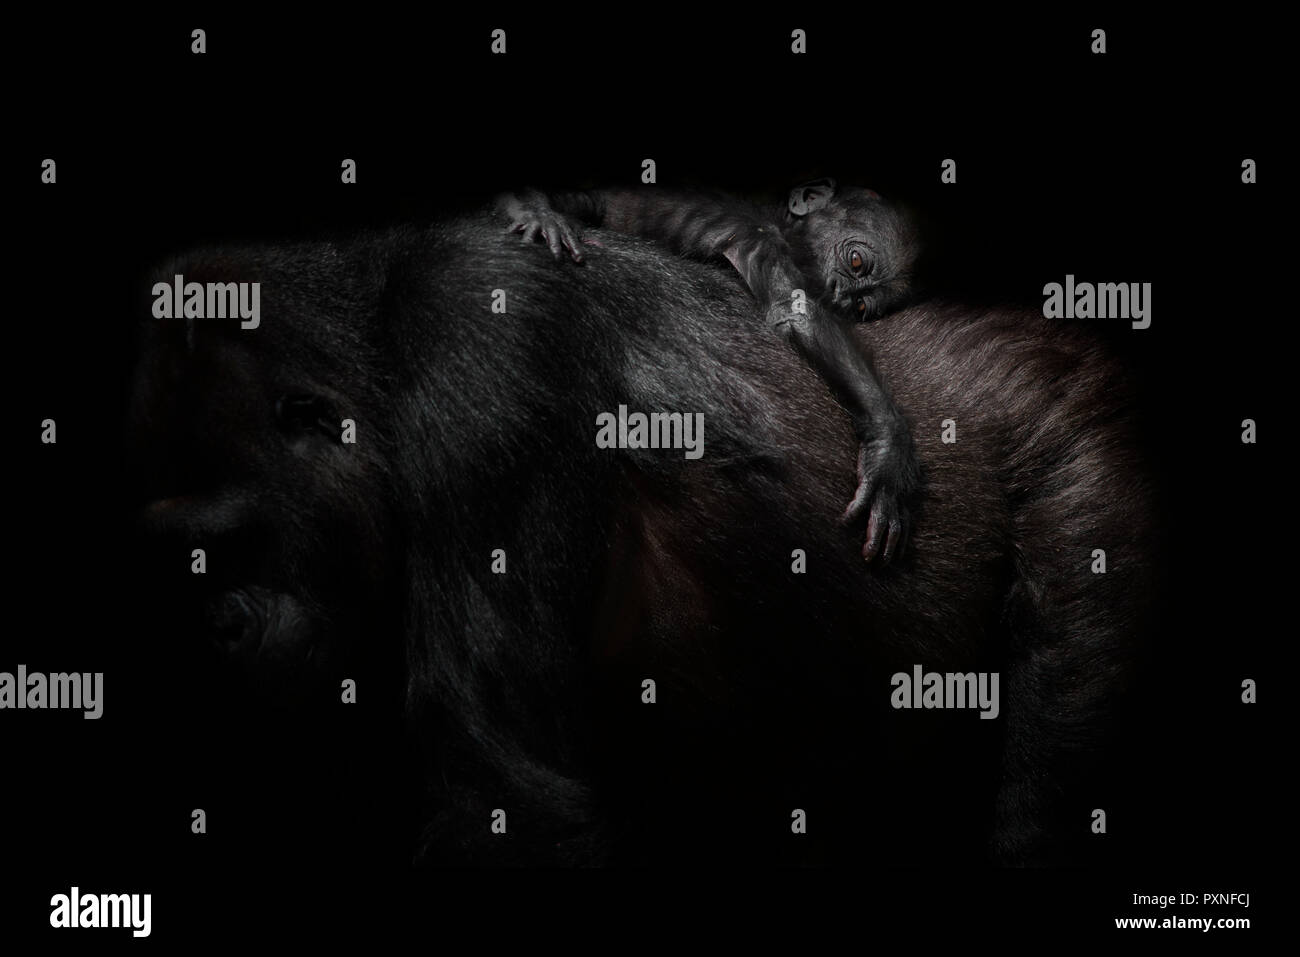 Gorilla baby lying on mother's back in front of black background Banque D'Images